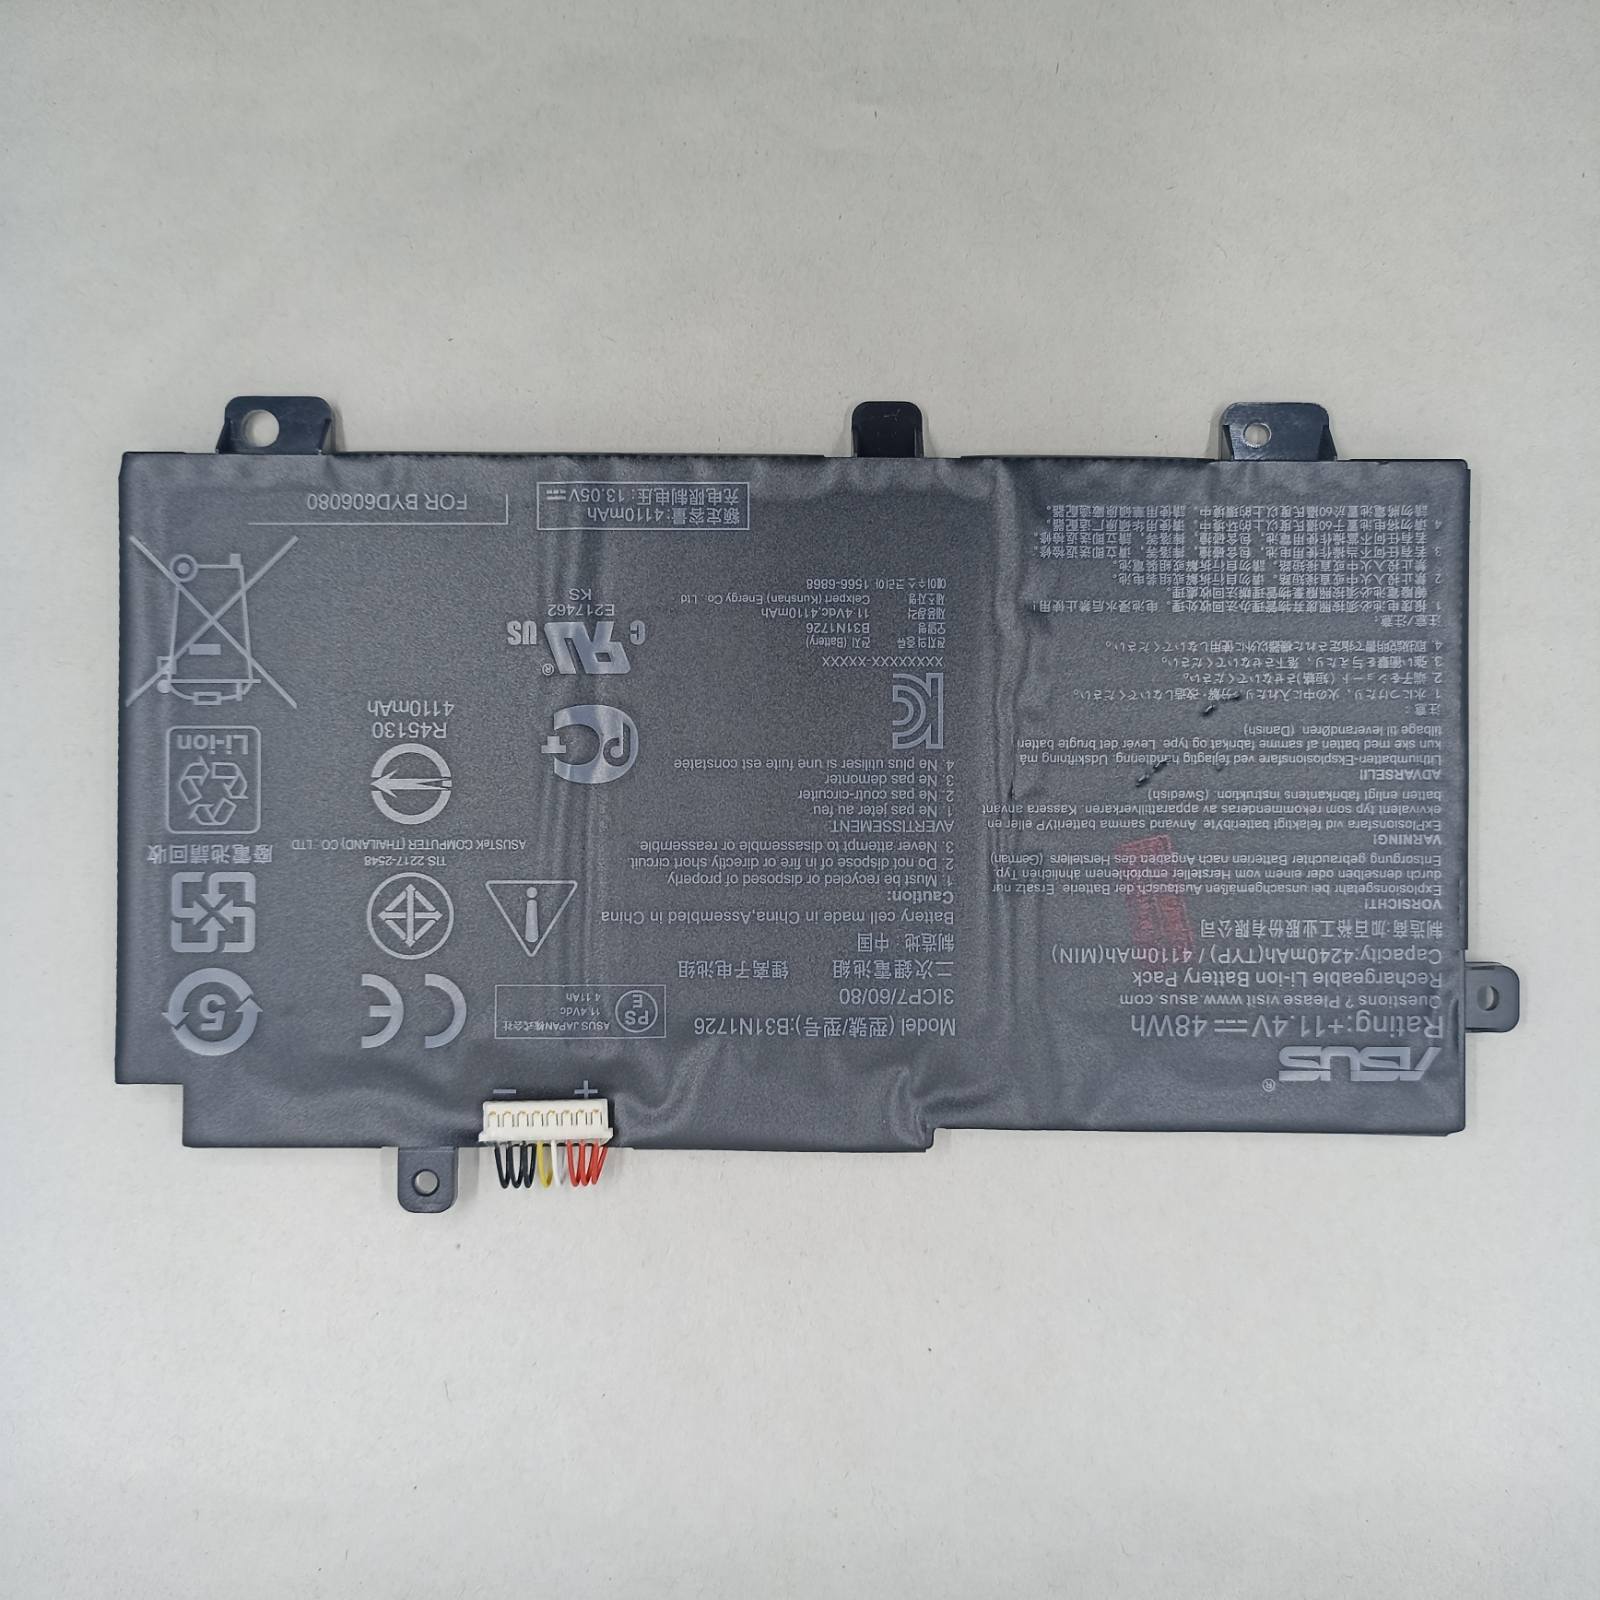 Replacement Battery for Asus FX505DU A1